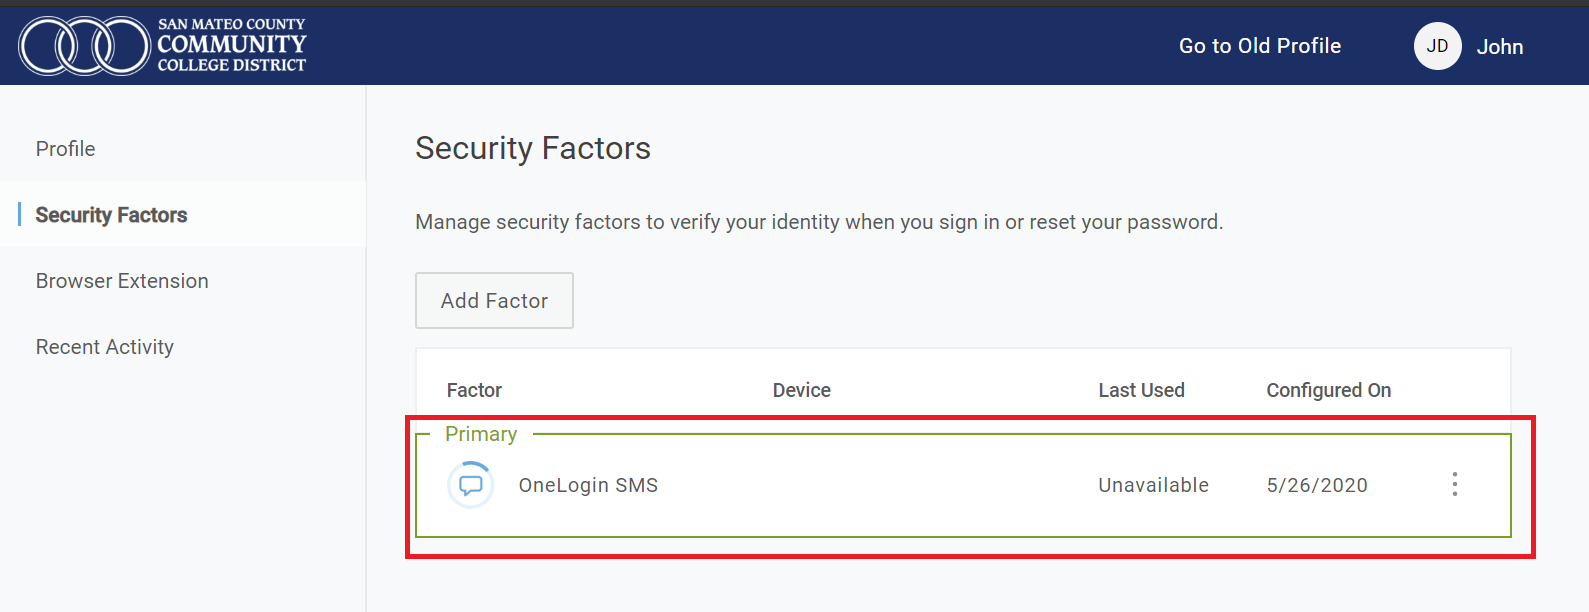 OneLogin SMS is highlighted as primary security factor